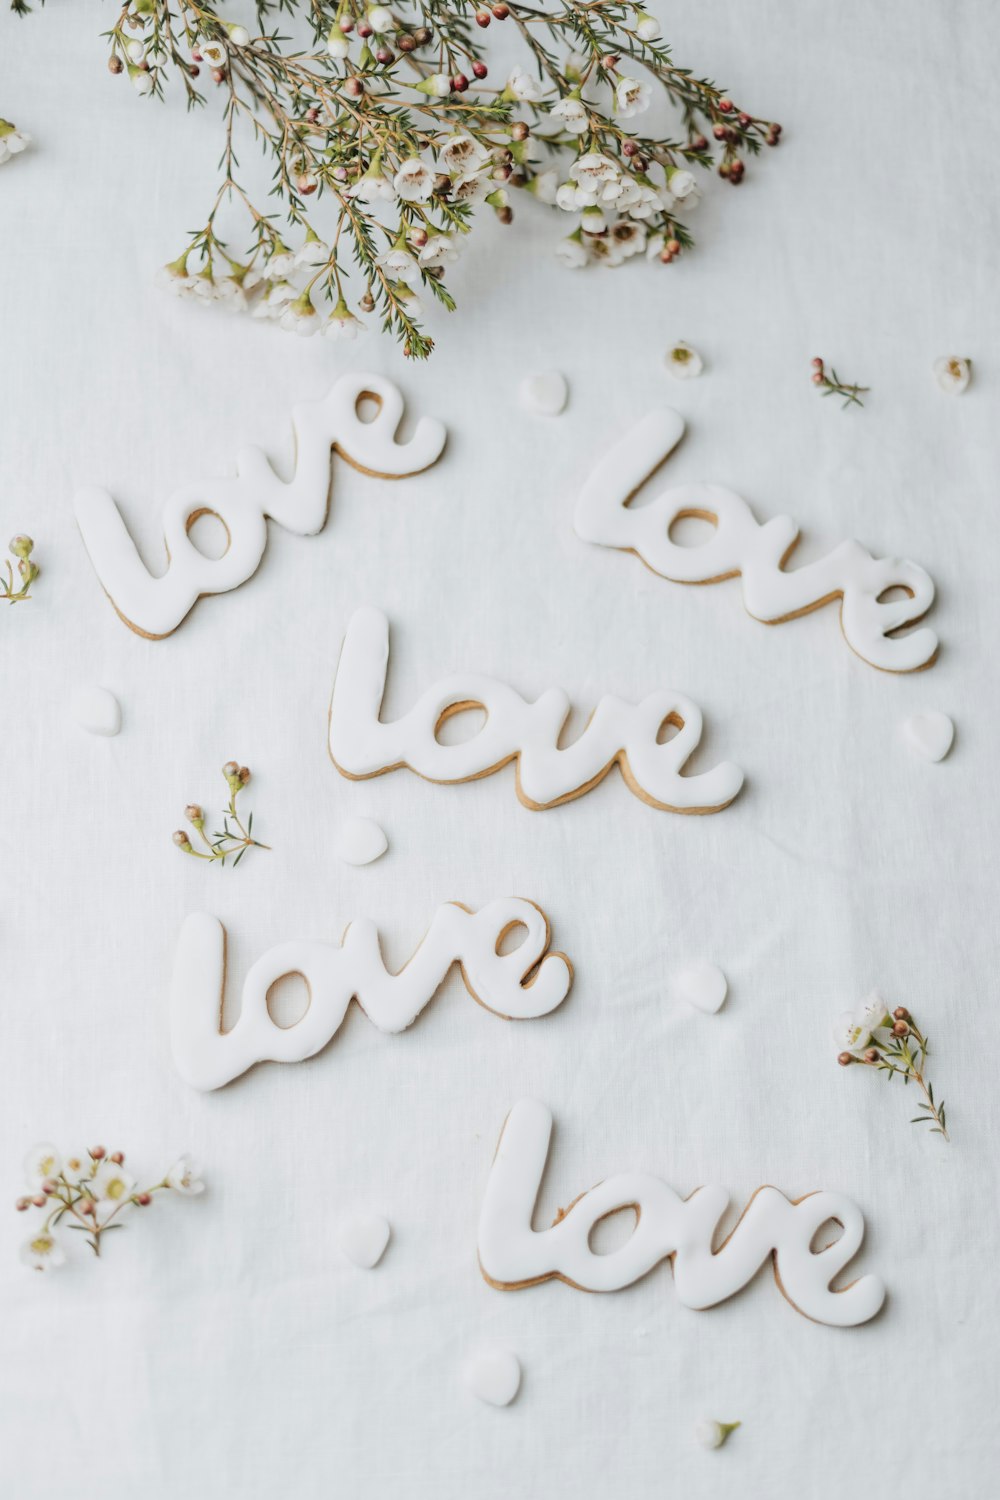 the words love and love spelled out on a sheet of paper